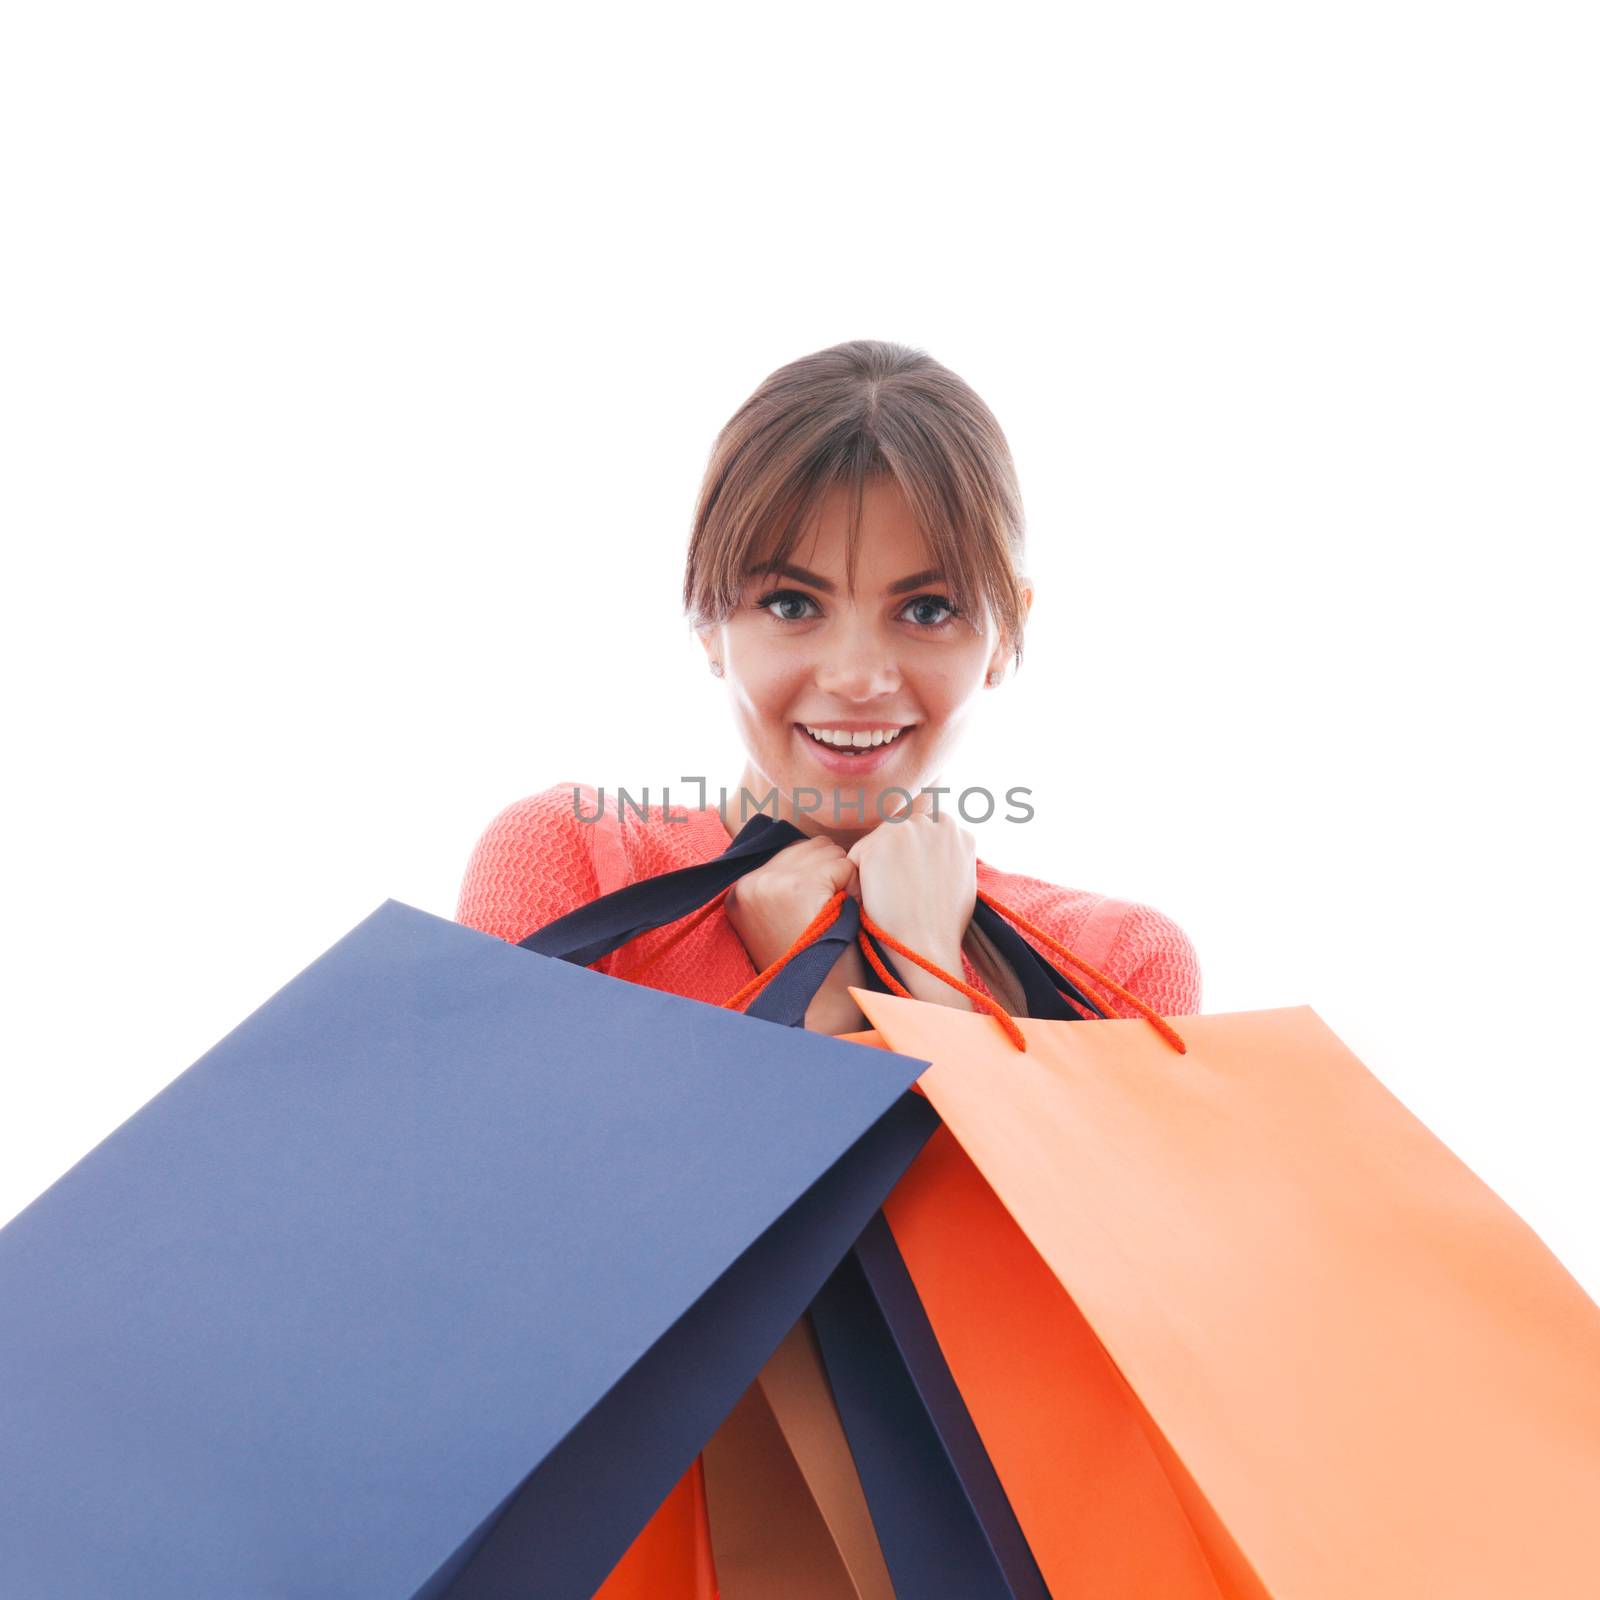 Shopping woman happy smiling holding shopping bags isolated on white background